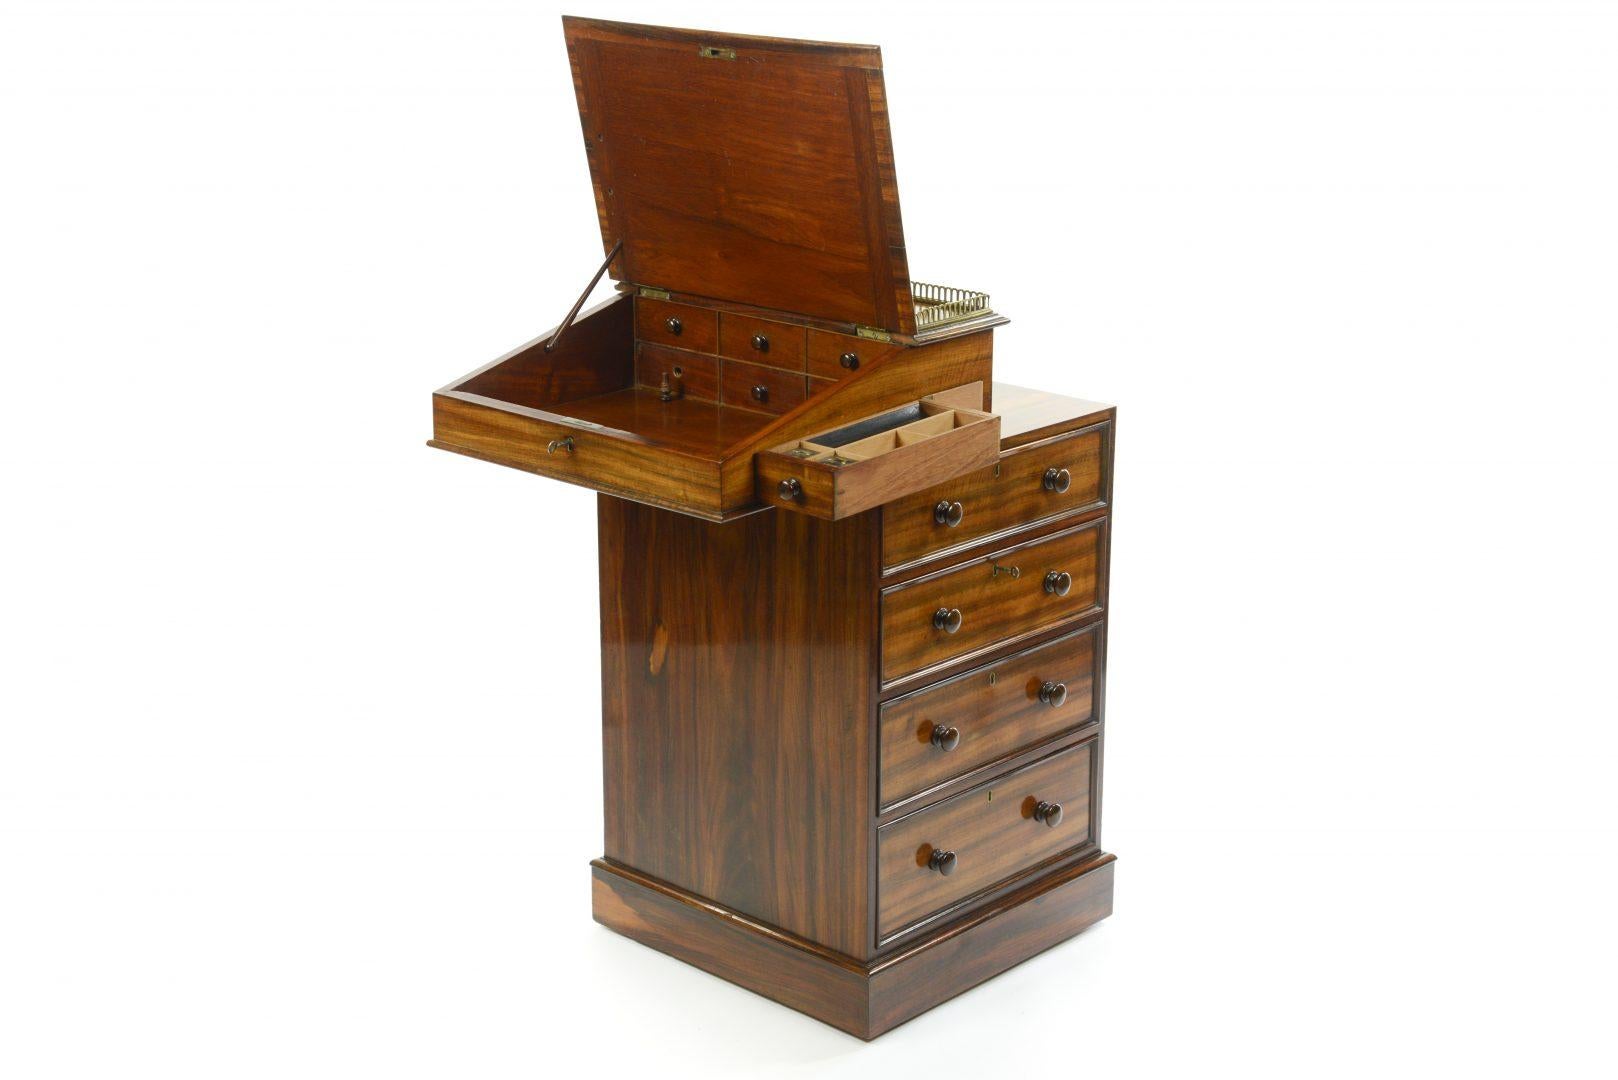 Regency Rosewood Davenport stamped Hindly & Son, late Miles and Edwards.
The prototype for this style of desk followed a request from a Captain Davenport towards the end of the eighteenth century to Gillows for a compact desk, he went on to order